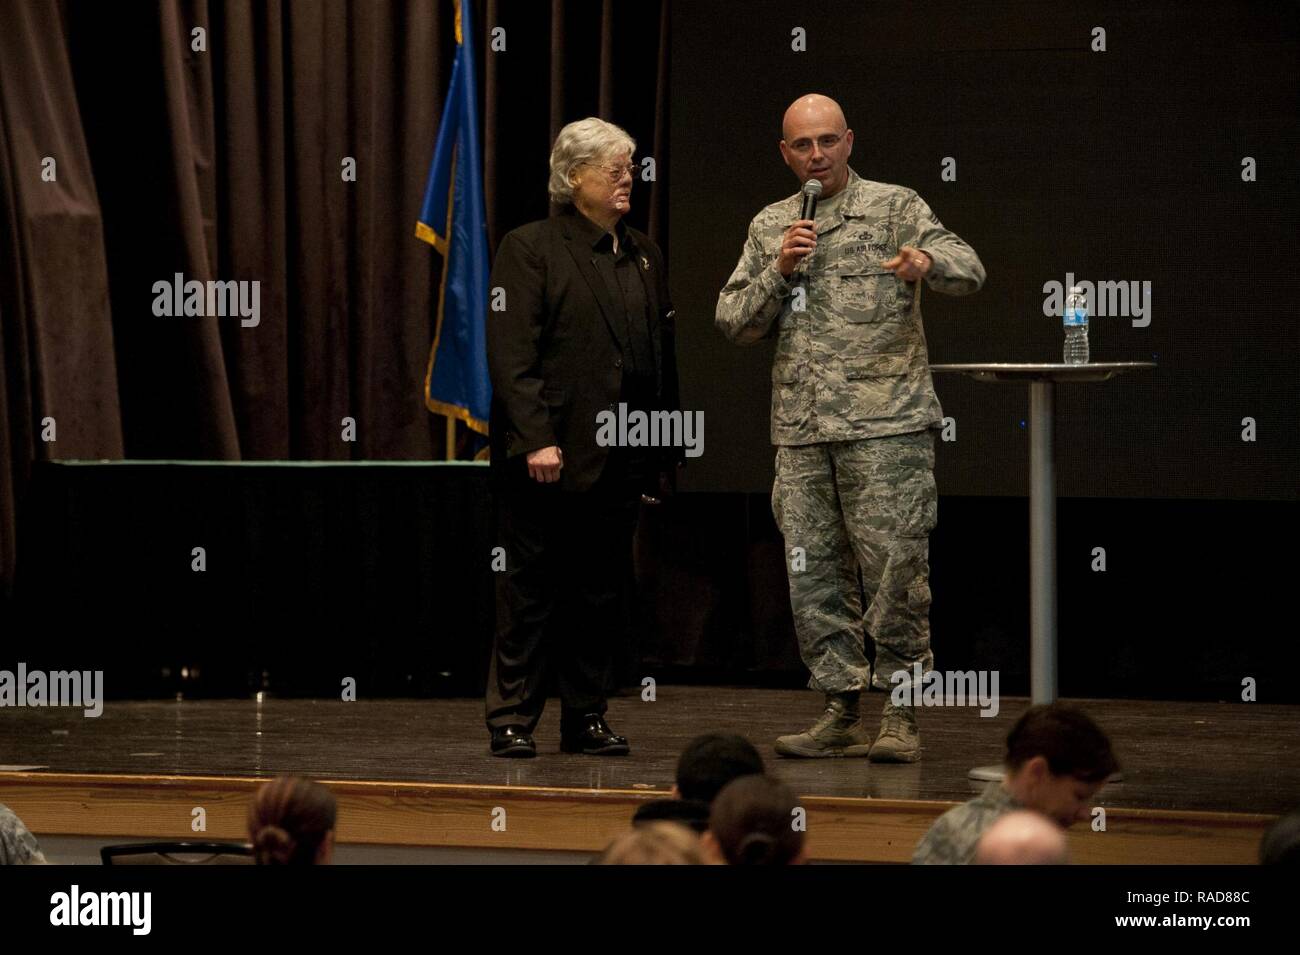 U.S. Air Force Chief Master Sgt. Alexander Del Valle, 51st Fighter Wing command chief, thanks Dave Roever, a Vietnam War veteran, for speaking about resiliency at Osan Air Base, Republic of Korea, Jan. 25, 2017. Roever, is an inspirational speaker who shares his story about how he survived after suffering burns all over his body when a phosphorus grenade exploded in his hand during the war. Stock Photo